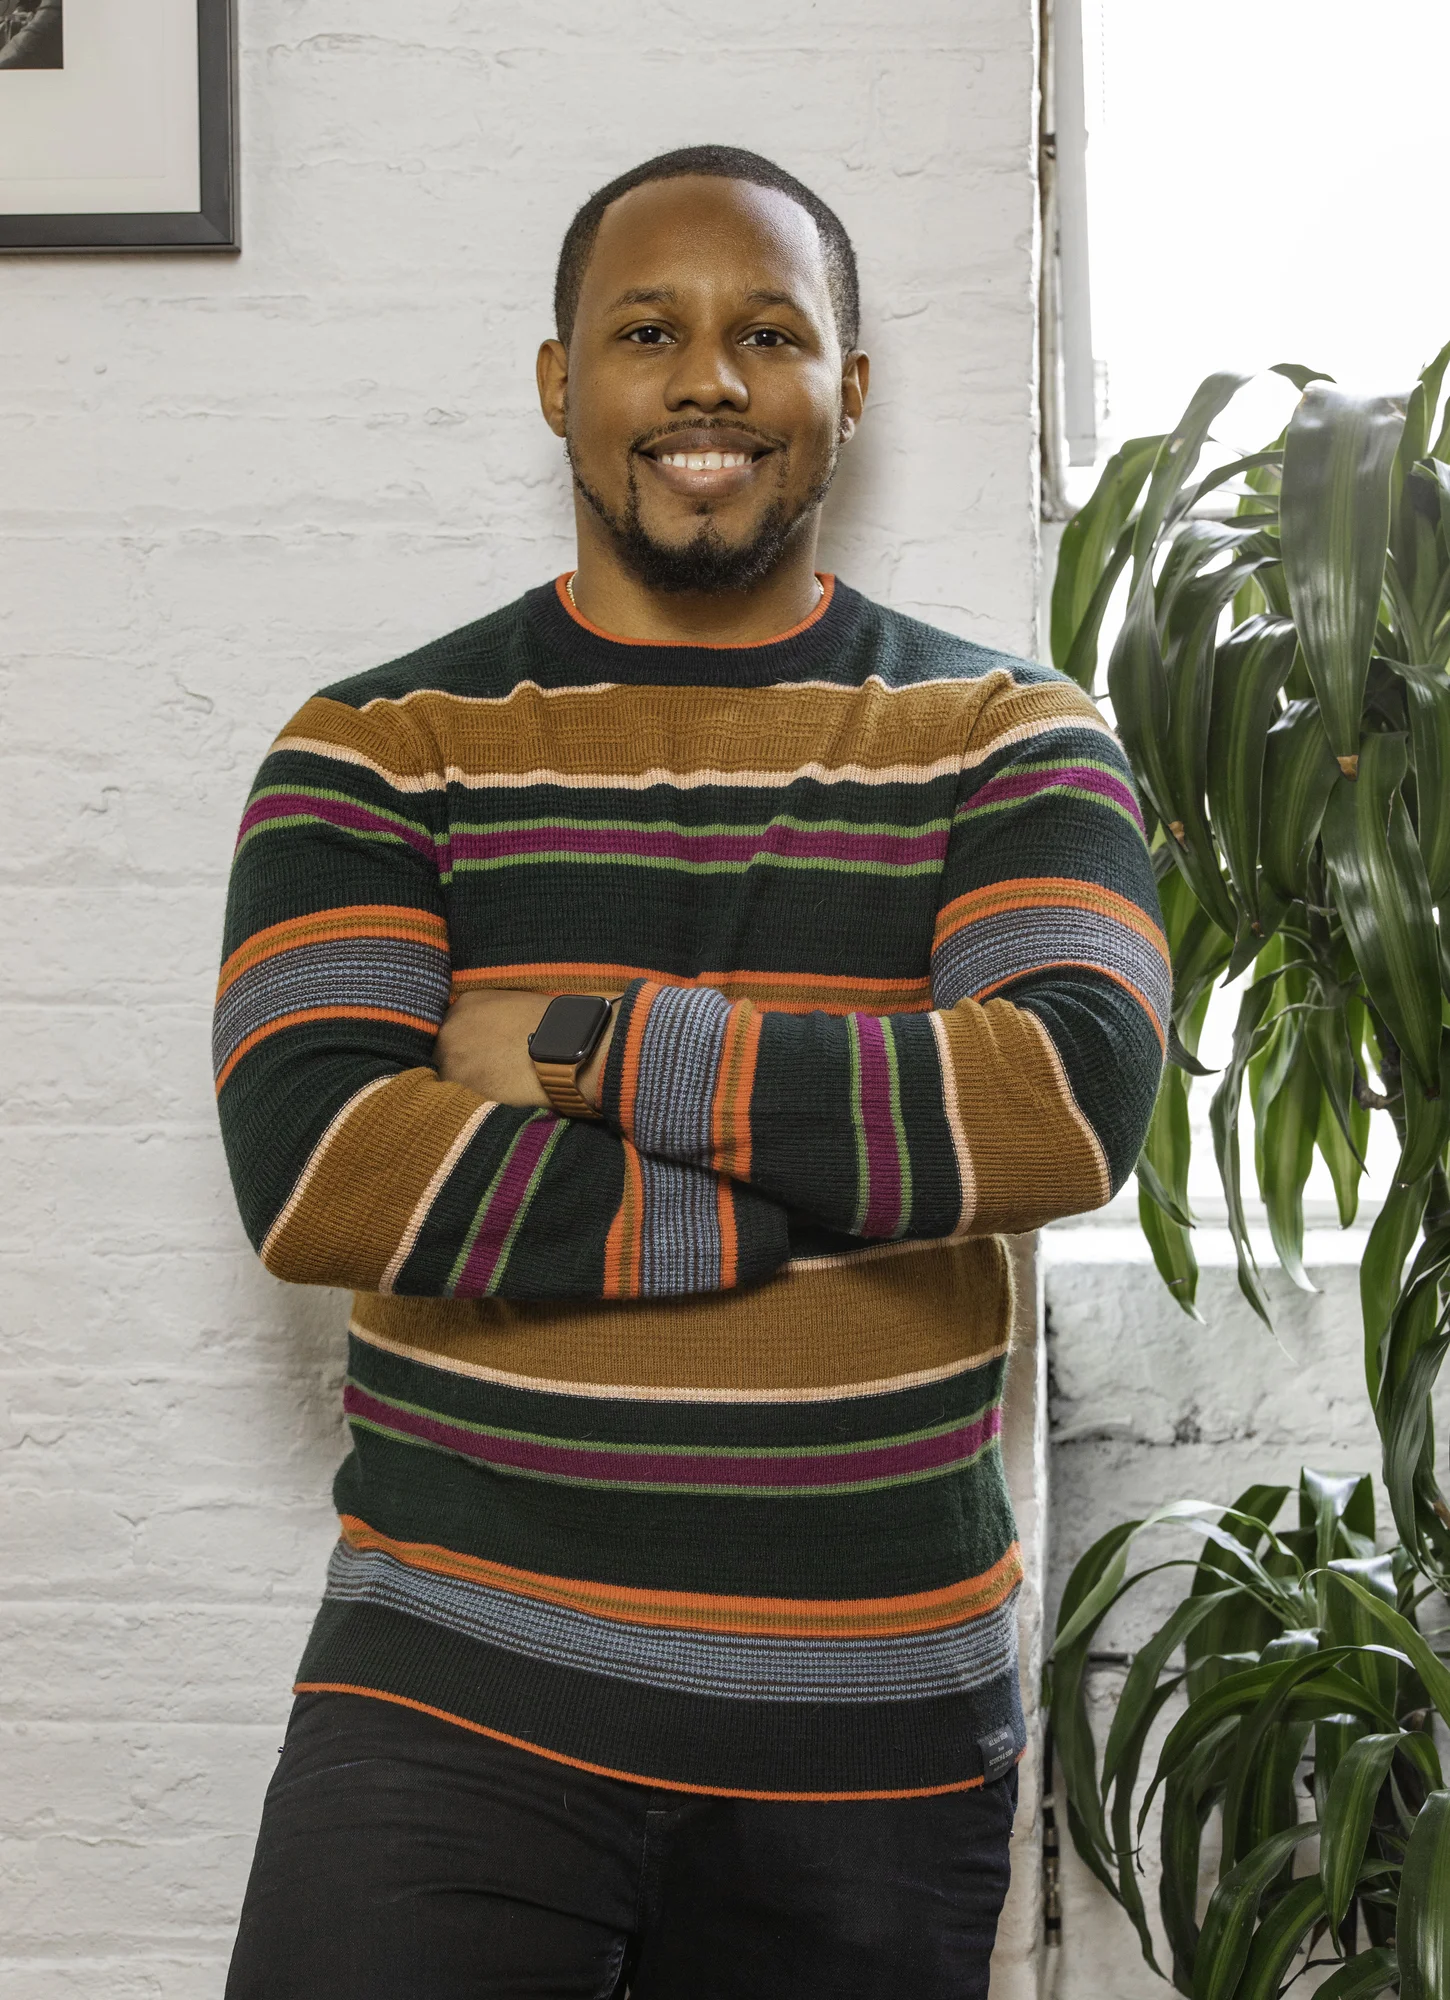 Anthony Edwards Jr stands with his arms crossed in a vivid sweater with orange, green, teal, salmon and cream stripes. He smiles at the camera and leans against a wall behind him.